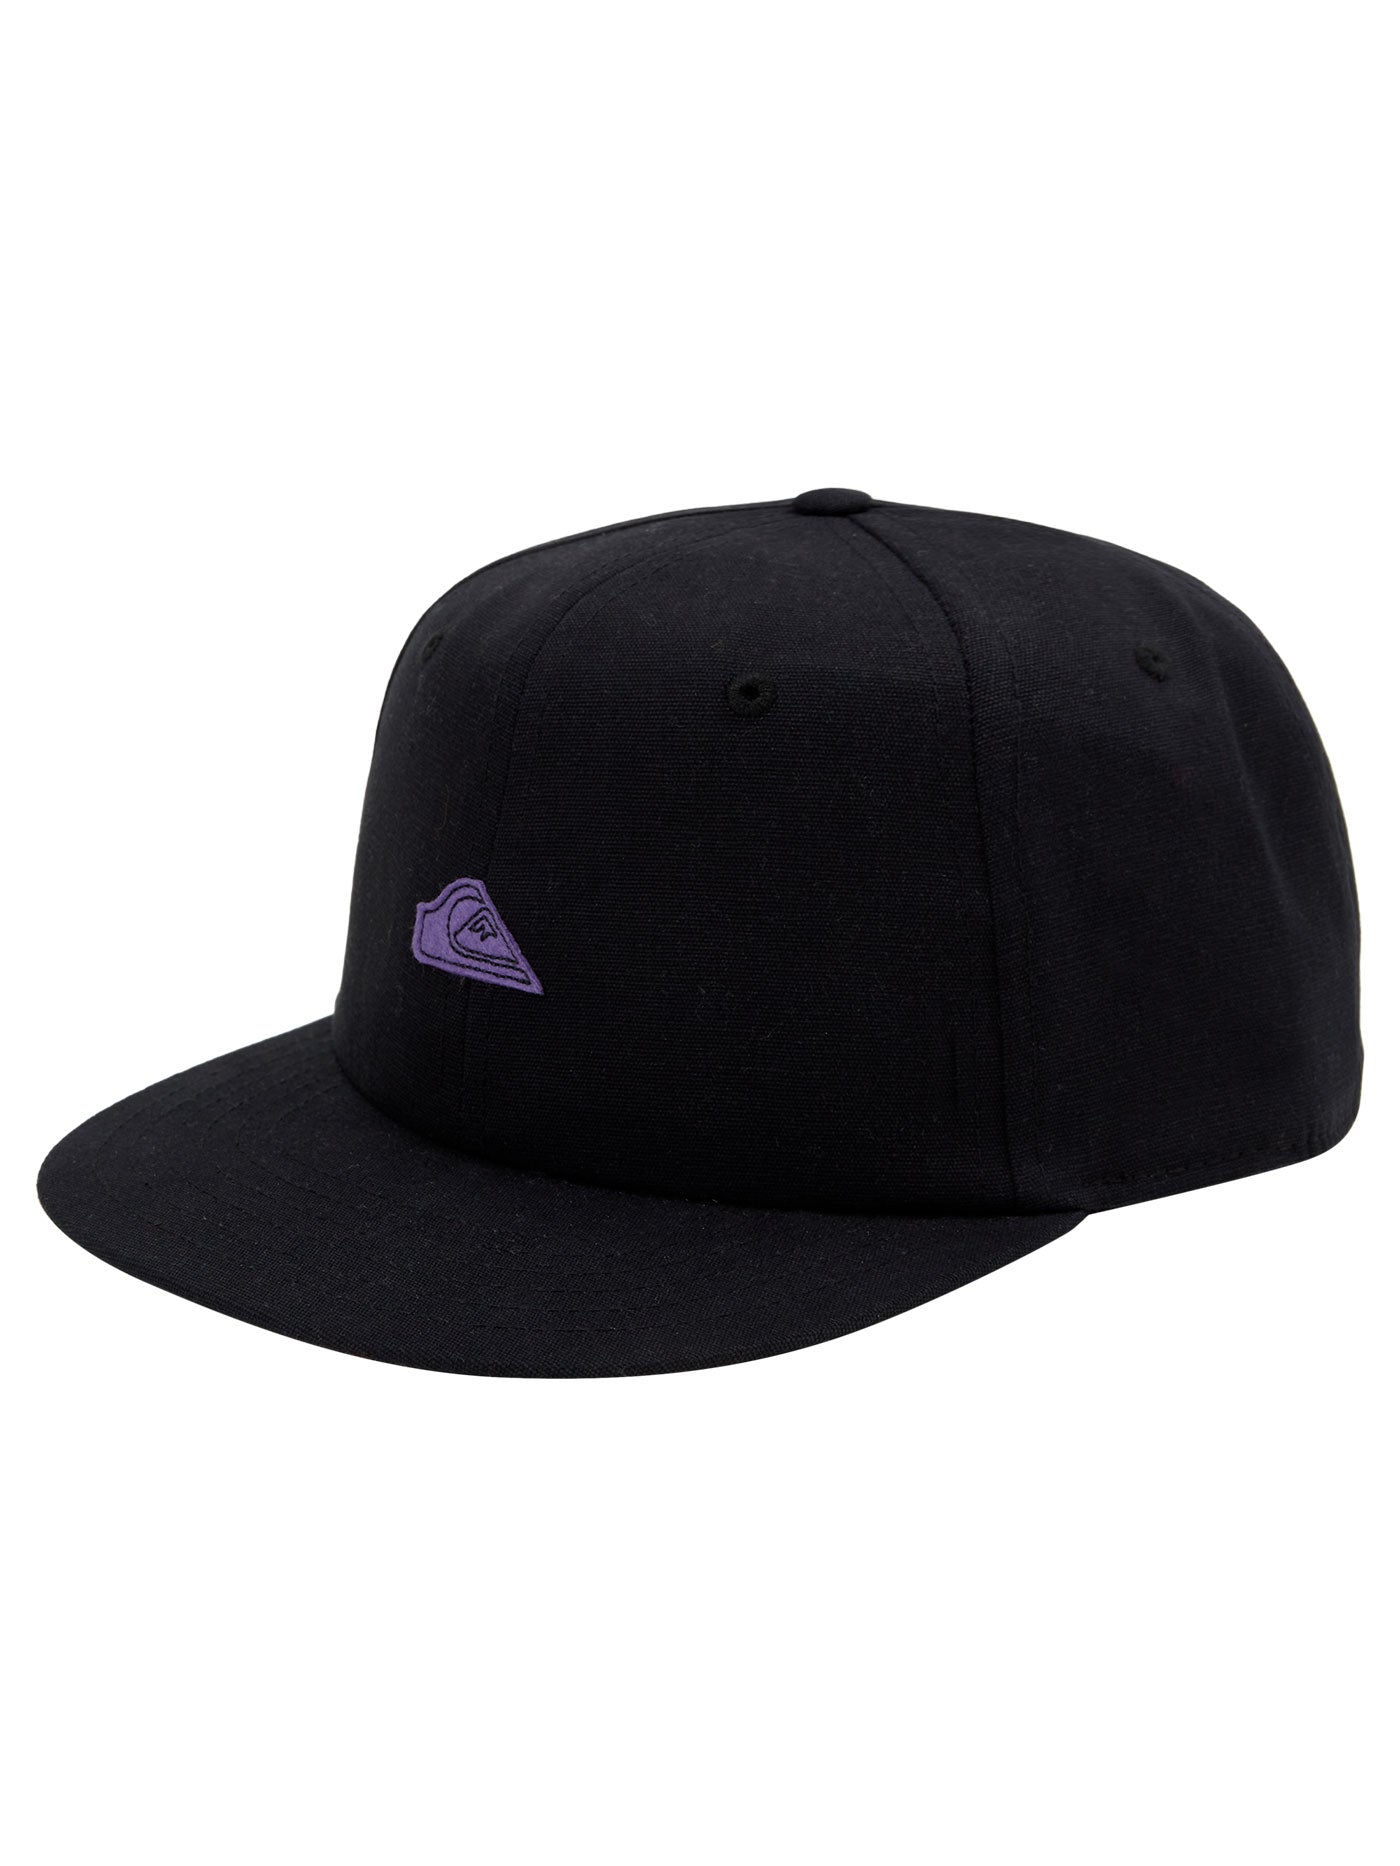 Quiksilver Gassed Up Snapback Hat